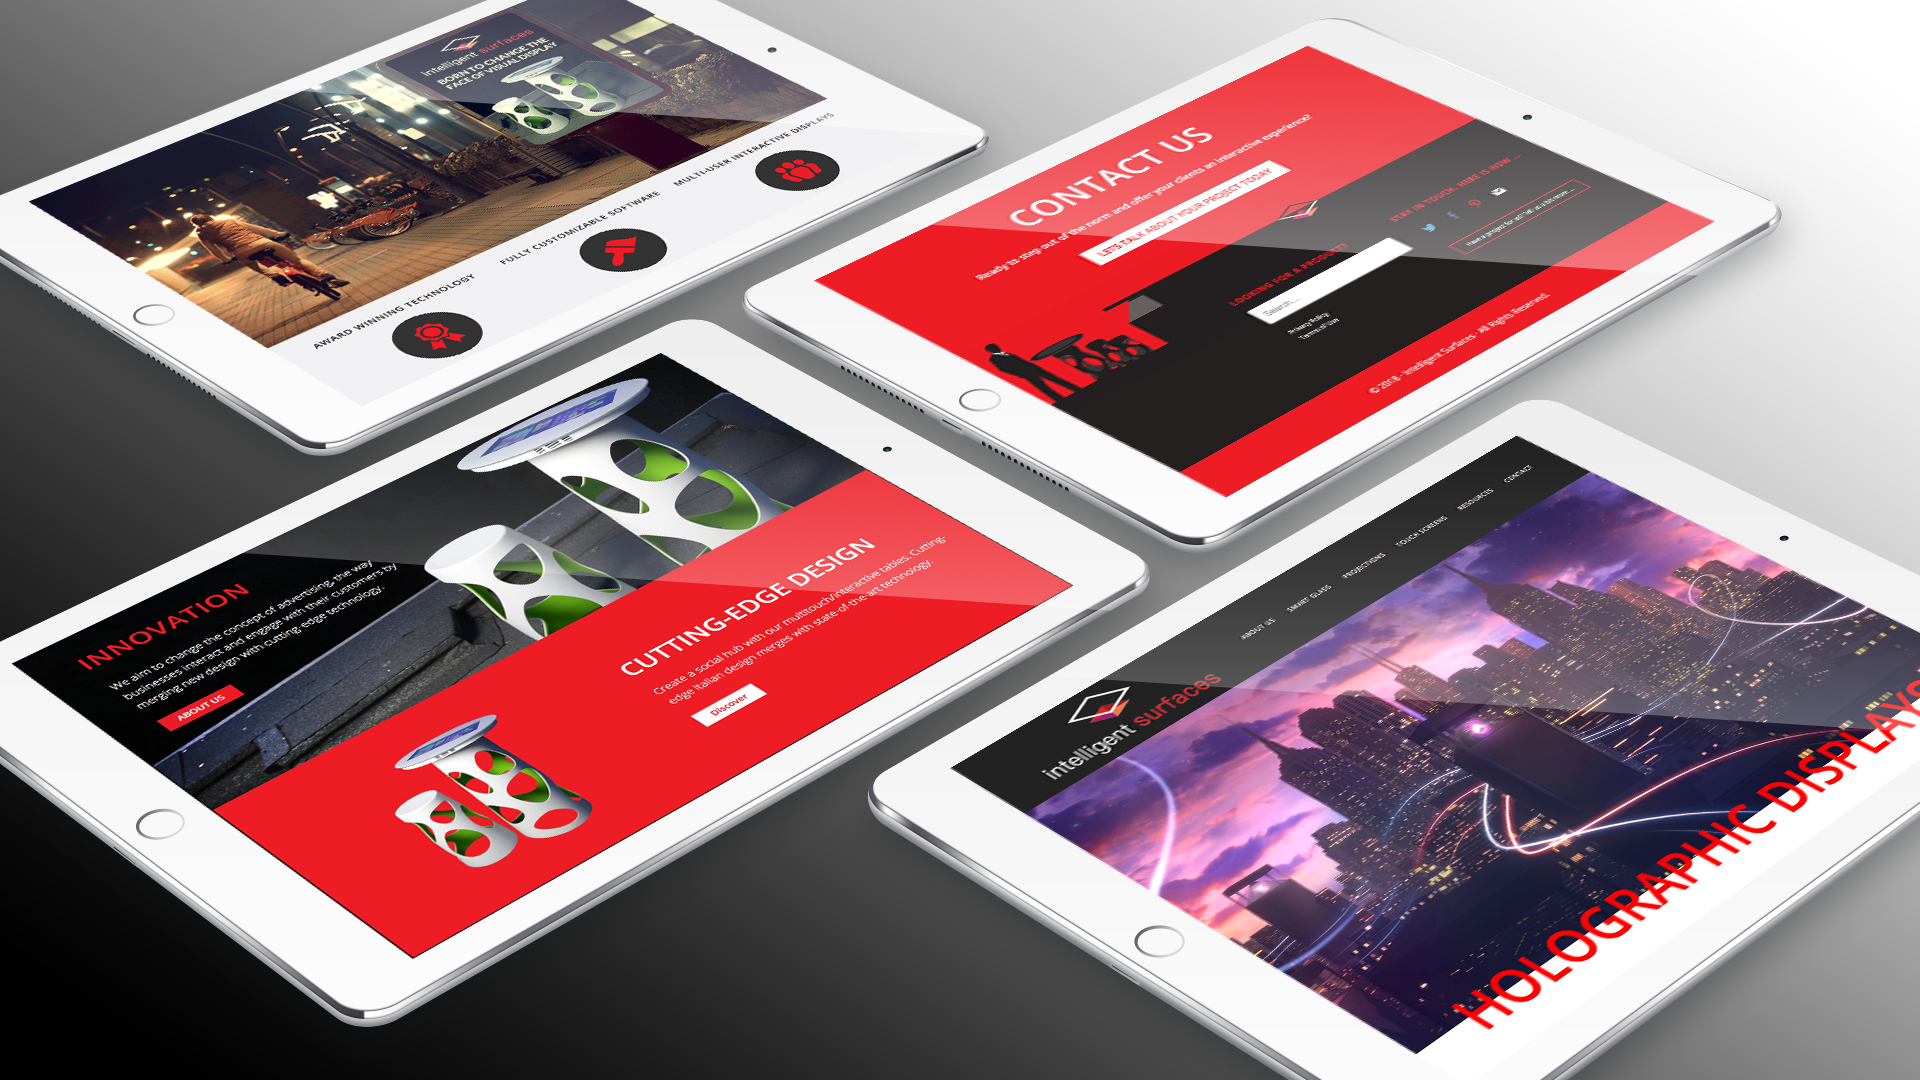 This depiction by PixelUp showcases four iPads positioned against a backdrop of a dark grey gradient. Each iPad screen features a webpage showcasing captivating elements from Intelligent Surfaces's website, with vibrant red hues prominently featured in the design. This forms a component of PixelUp's Intelligent Surfaces Project.